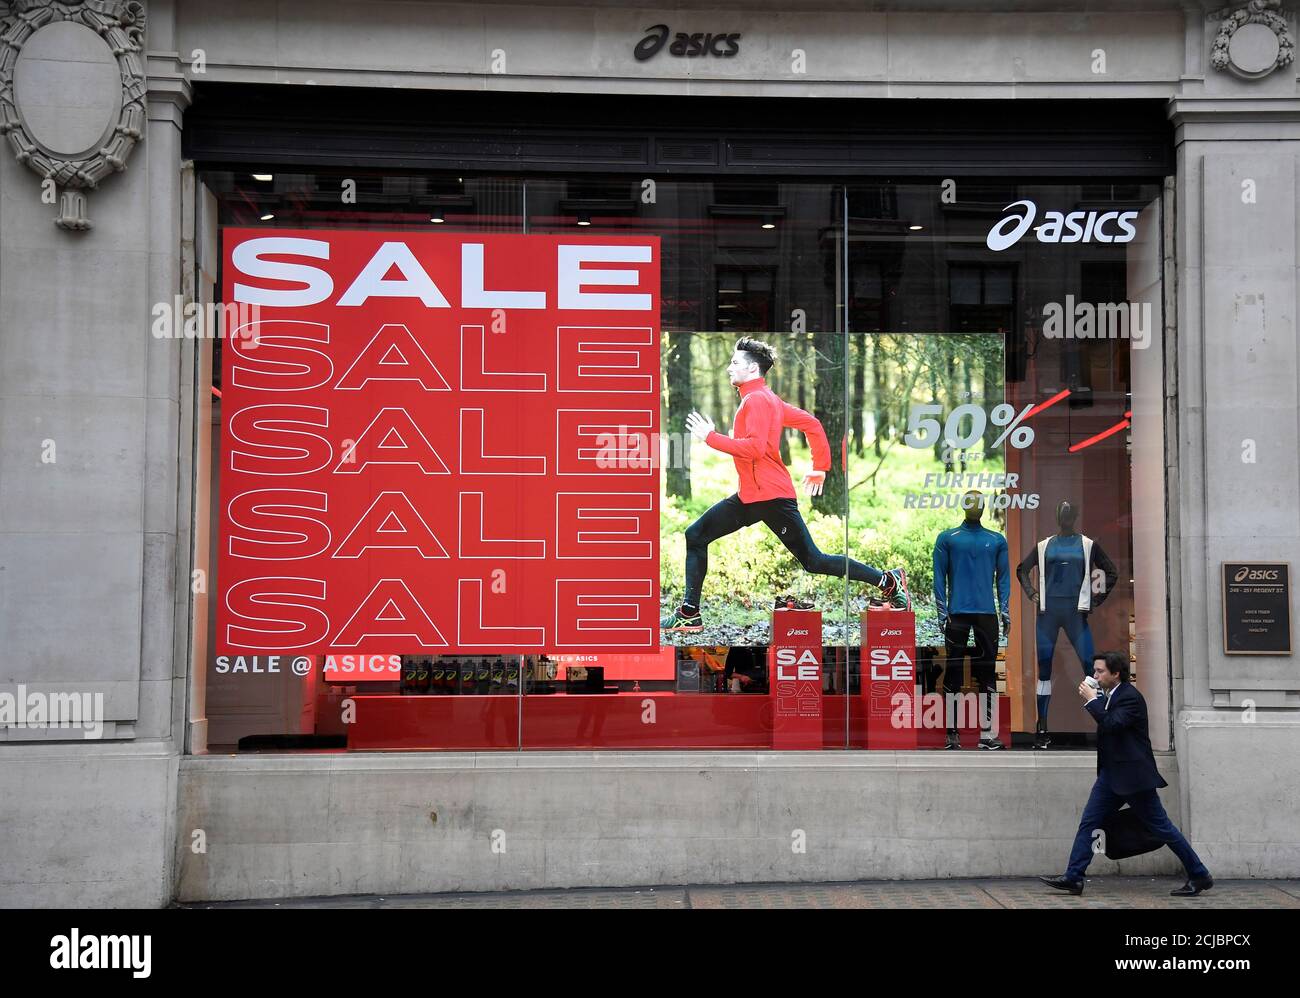 A man walks past an Asics store in London, Britain, January 24, 2020.  REUTERS/Toby Melville Stock Photo - Alamy